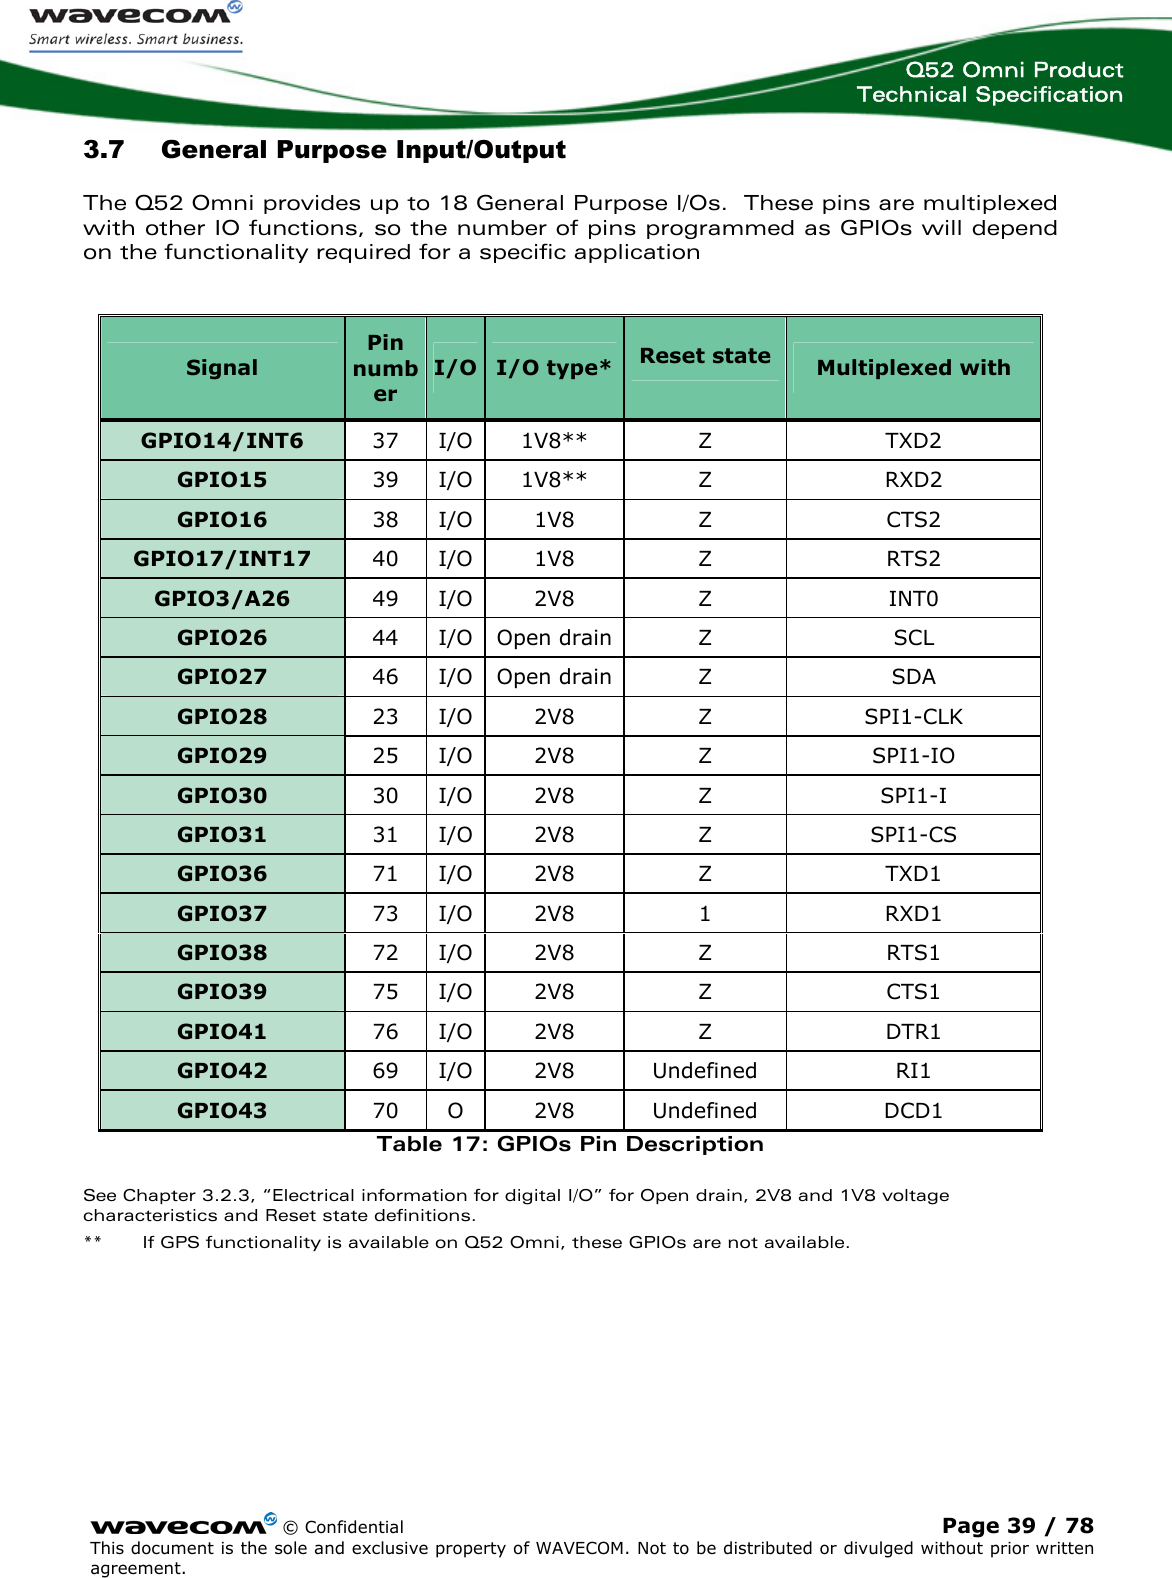  Q52 Omni Product Technical Specification    © Confidential Page 39 / 78 This document is the sole and exclusive property of WAVECOM. Not to be distributed or divulged without prior written agreement.  3.7  General Purpose Input/Output The Q52 Omni provides up to 18 General Purpose I/Os.  These pins are multiplexed with other IO functions, so the number of pins programmed as GPIOs will depend on the functionality required for a specific application  Signal Pin number I/O I/O type* Reset state Multiplexed with GPIO14/INT6  37 I/O  1V8**  Z  TXD2 GPIO15  39 I/O  1V8**  Z  RXD2 GPIO16  38 I/O  1V8  Z  CTS2 GPIO17/INT17  40 I/O  1V8  Z  RTS2 GPIO3/A26  49 I/O  2V8  Z  INT0 GPIO26  44 I/O Open drain Z SCL GPIO27  46  I/O  Open drain Z  SDA GPIO28  23 I/O  2V8  Z  SPI1-CLK  GPIO29  25 I/O  2V8  Z  SPI1-IO GPIO30  30 I/O  2V8  Z  SPI1-I GPIO31  31 I/O  2V8  Z  SPI1-CS GPIO36  71 I/O  2V8  Z  TXD1 GPIO37  73 I/O  2V8  1  RXD1 GPIO38  72 I/O  2V8  Z  RTS1 GPIO39  75 I/O  2V8  Z  CTS1 GPIO41  76 I/O  2V8  Z  DTR1 GPIO42  69 I/O  2V8  Undefined  RI1 GPIO43  70 O  2V8  Undefined  DCD1 Table 17: GPIOs Pin Description See Chapter 3.2.3, “Electrical information for digital I/O” for Open drain, 2V8 and 1V8 voltage characteristics and Reset state definitions. **   If GPS functionality is available on Q52 Omni, these GPIOs are not available. 